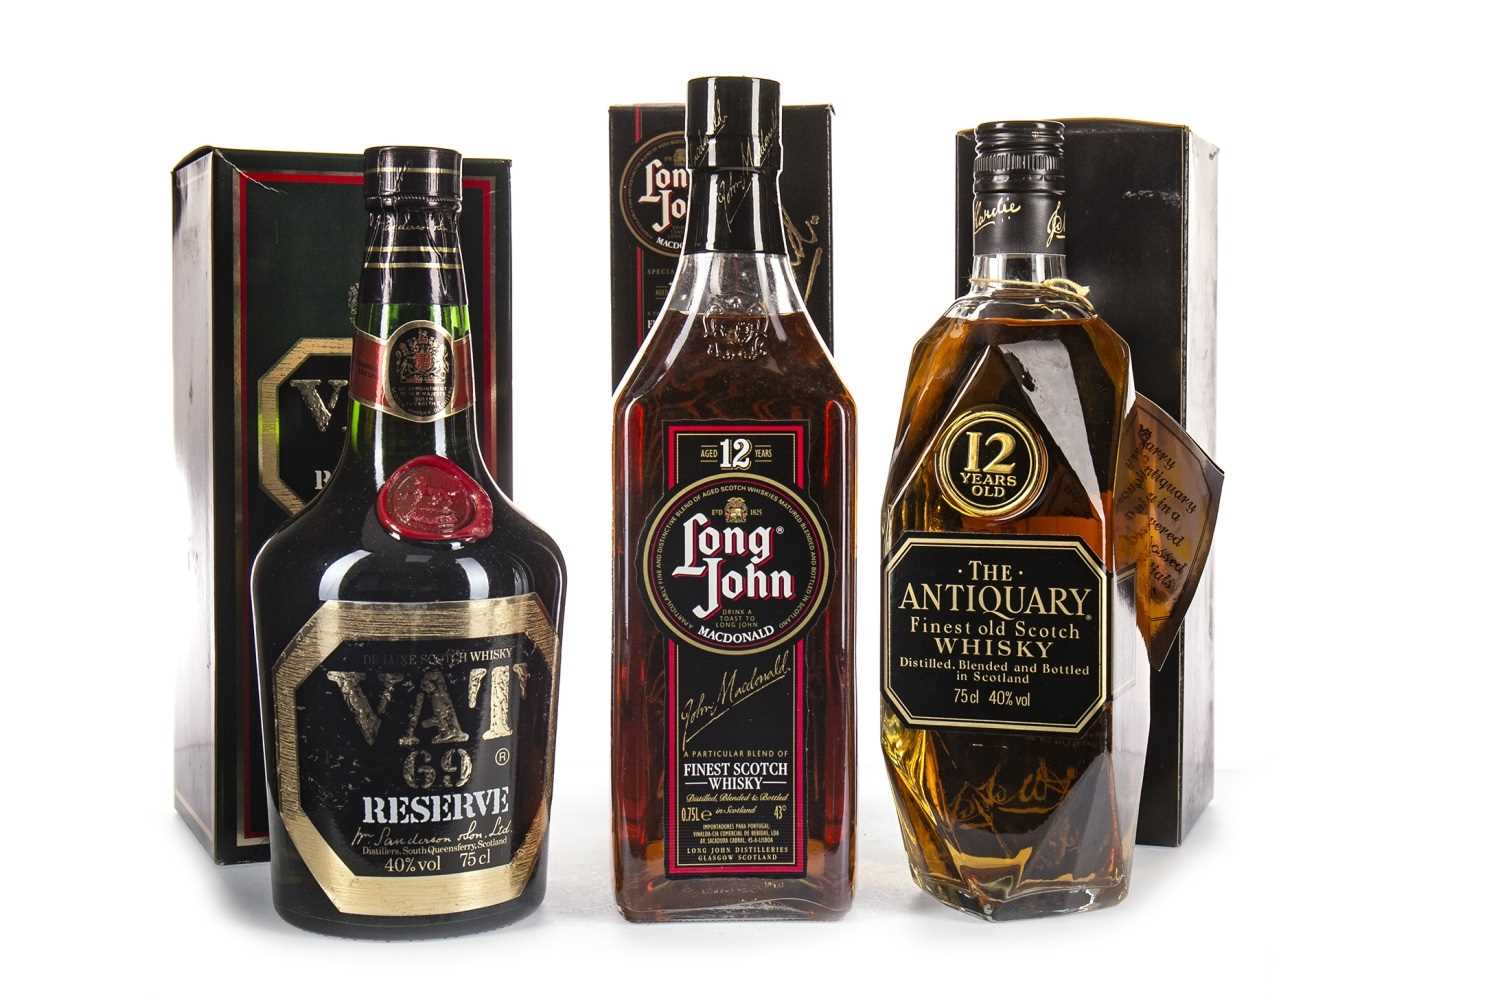 Lot 456 - VAT 69 RESERVE, ANTIQUARY 12 YEARS OLD AND LONG JOHN 12 YEARS OLD